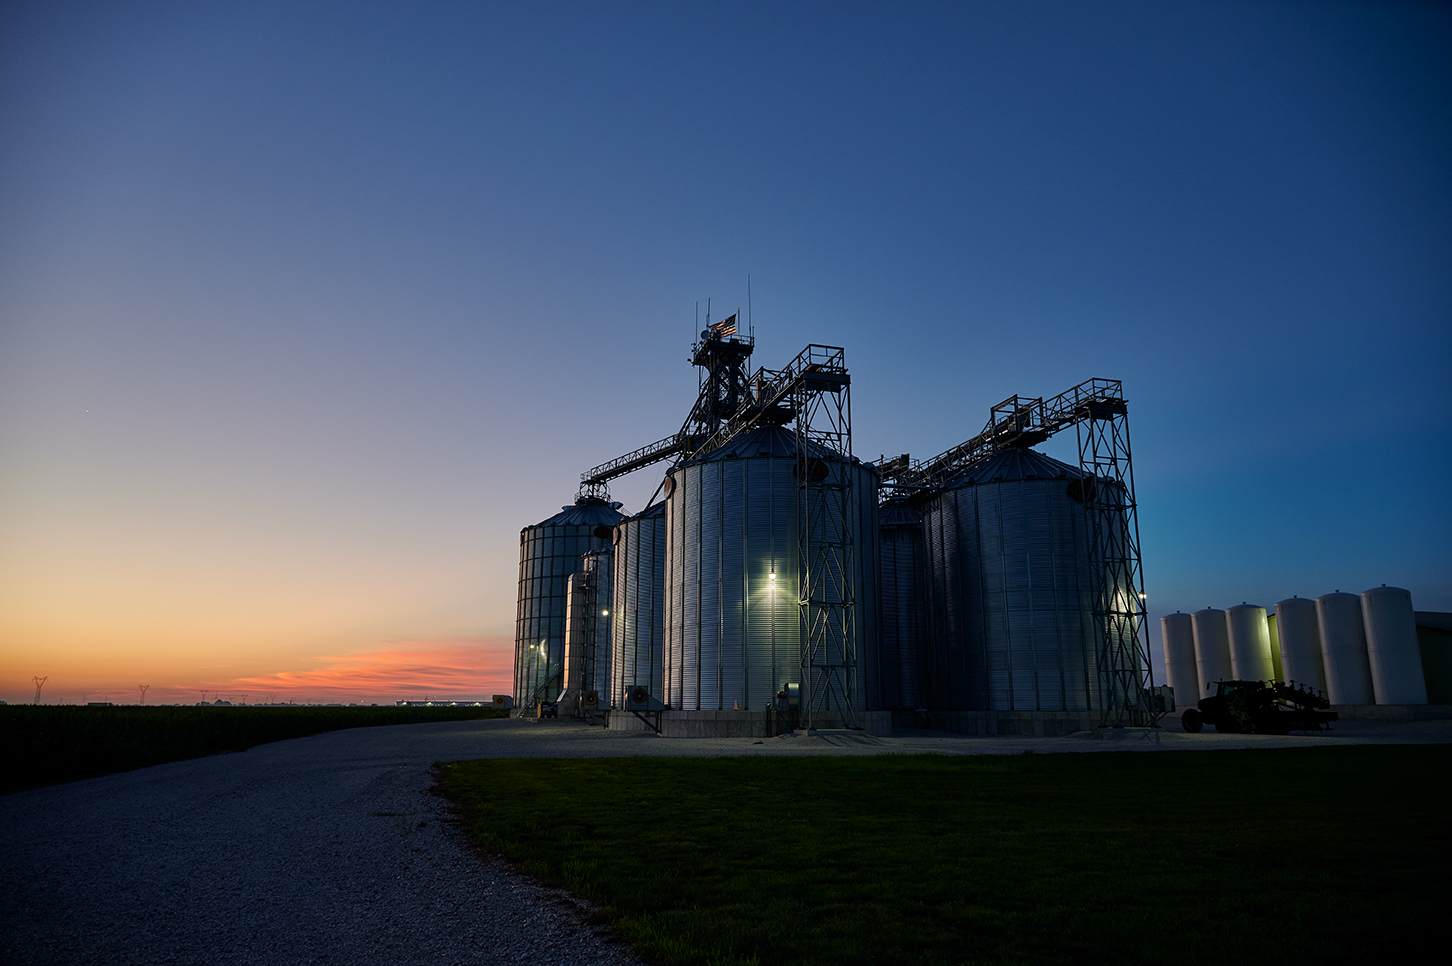 Agricultural and Industrial Photography on Location by Robert J. Polett, Photographer